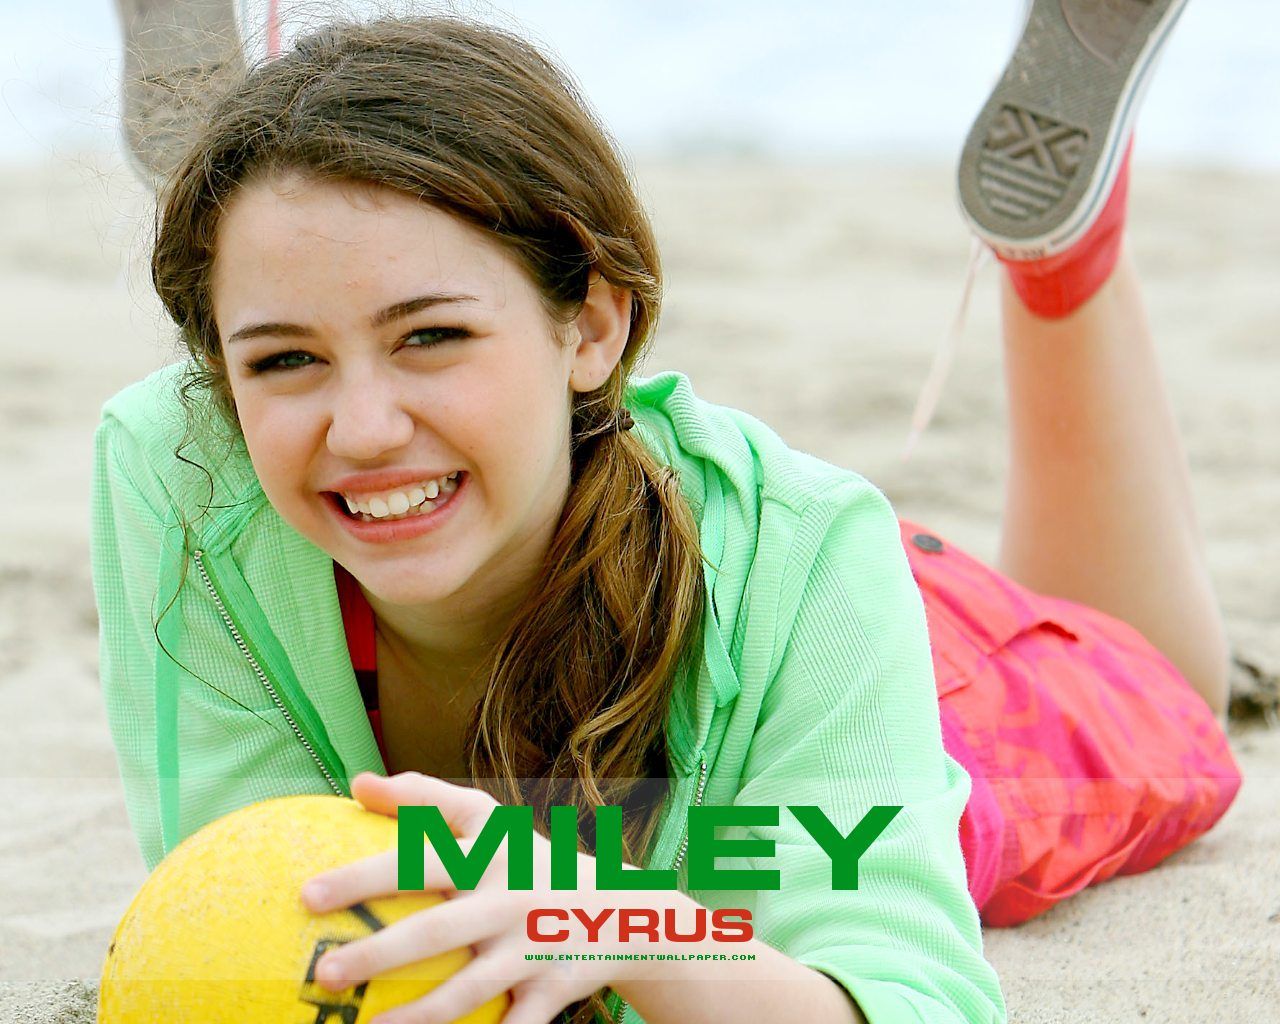 News and entertainment: miley cyrus (Jan 05 2013 17:08:14)